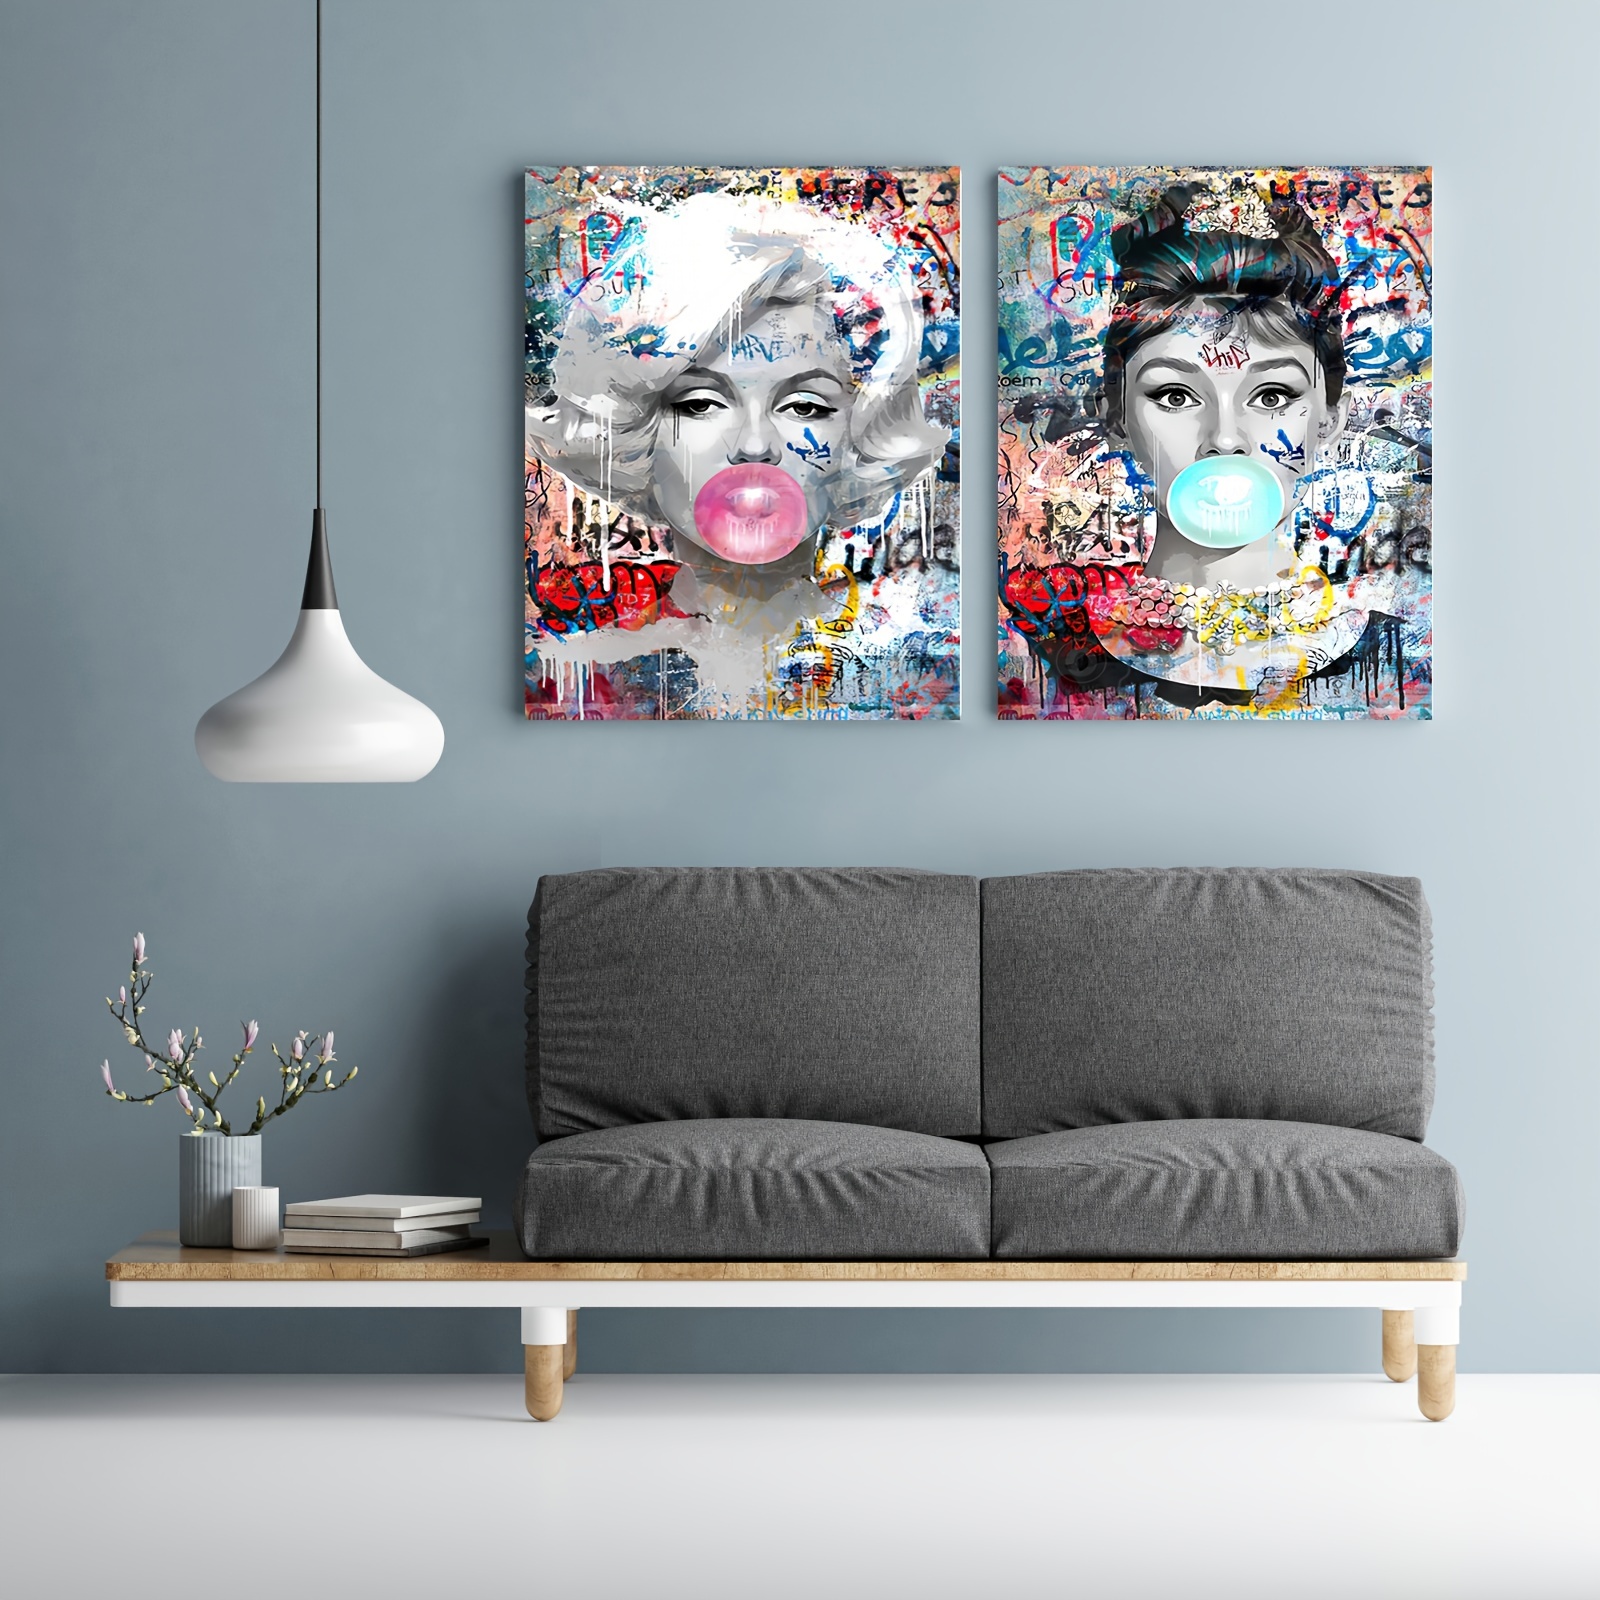 

2pcs Art Canvas Print Painting, Abstract Bubble Girl Art Painting Creative Home Decoration For Bedroom, Living Room, Bathroom - Perfect Birthday Gift And Party Decoration Supplies